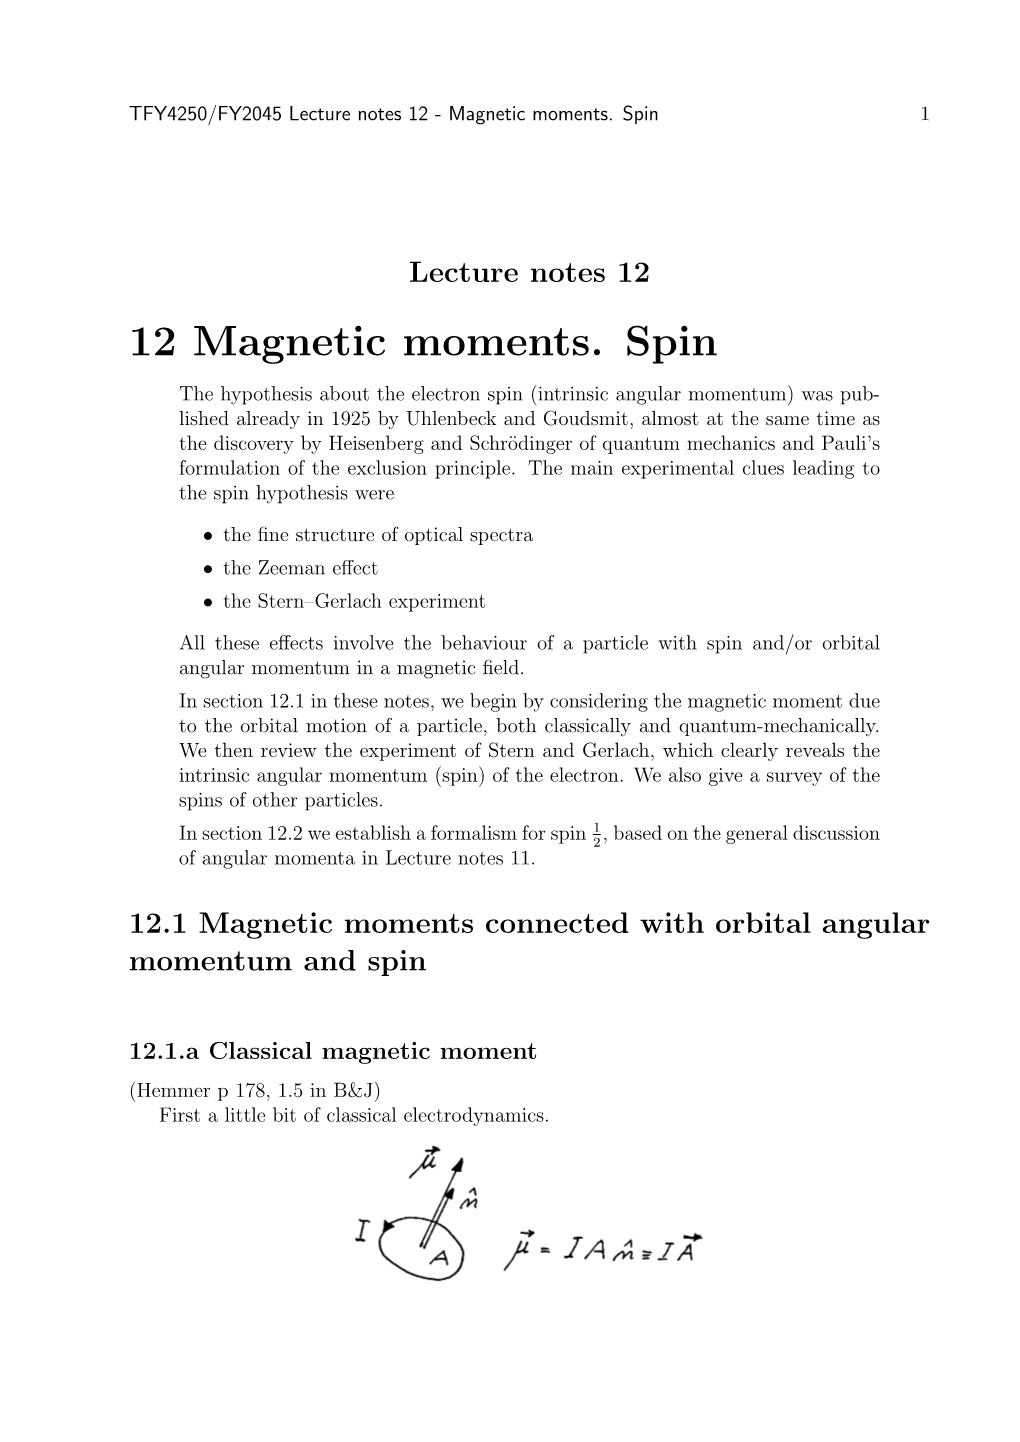 12 Magnetic Moments. Spin